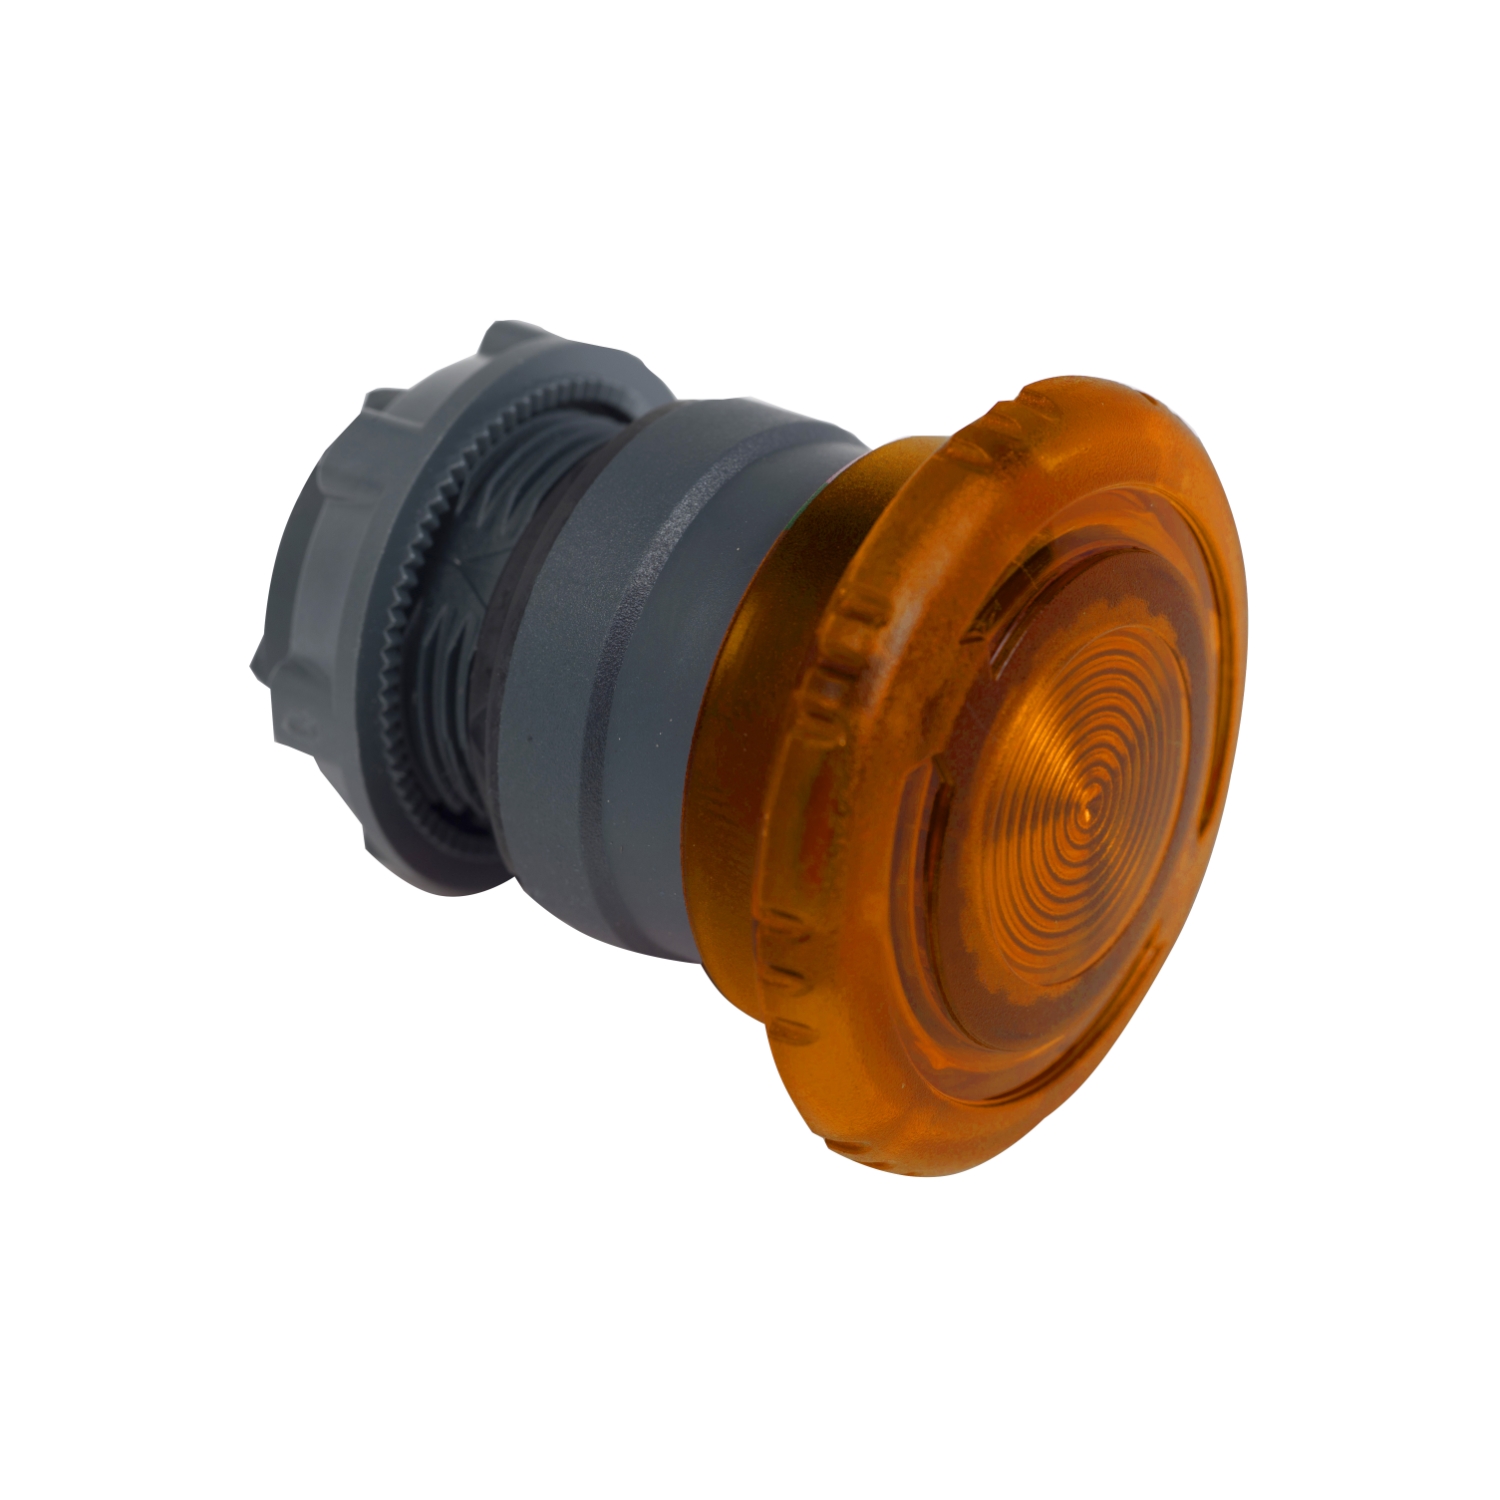 Head for illuminated push button, Harmony XB5, plastic, orange mushroom 40mm, 22mm, latching turn to release, clear boot